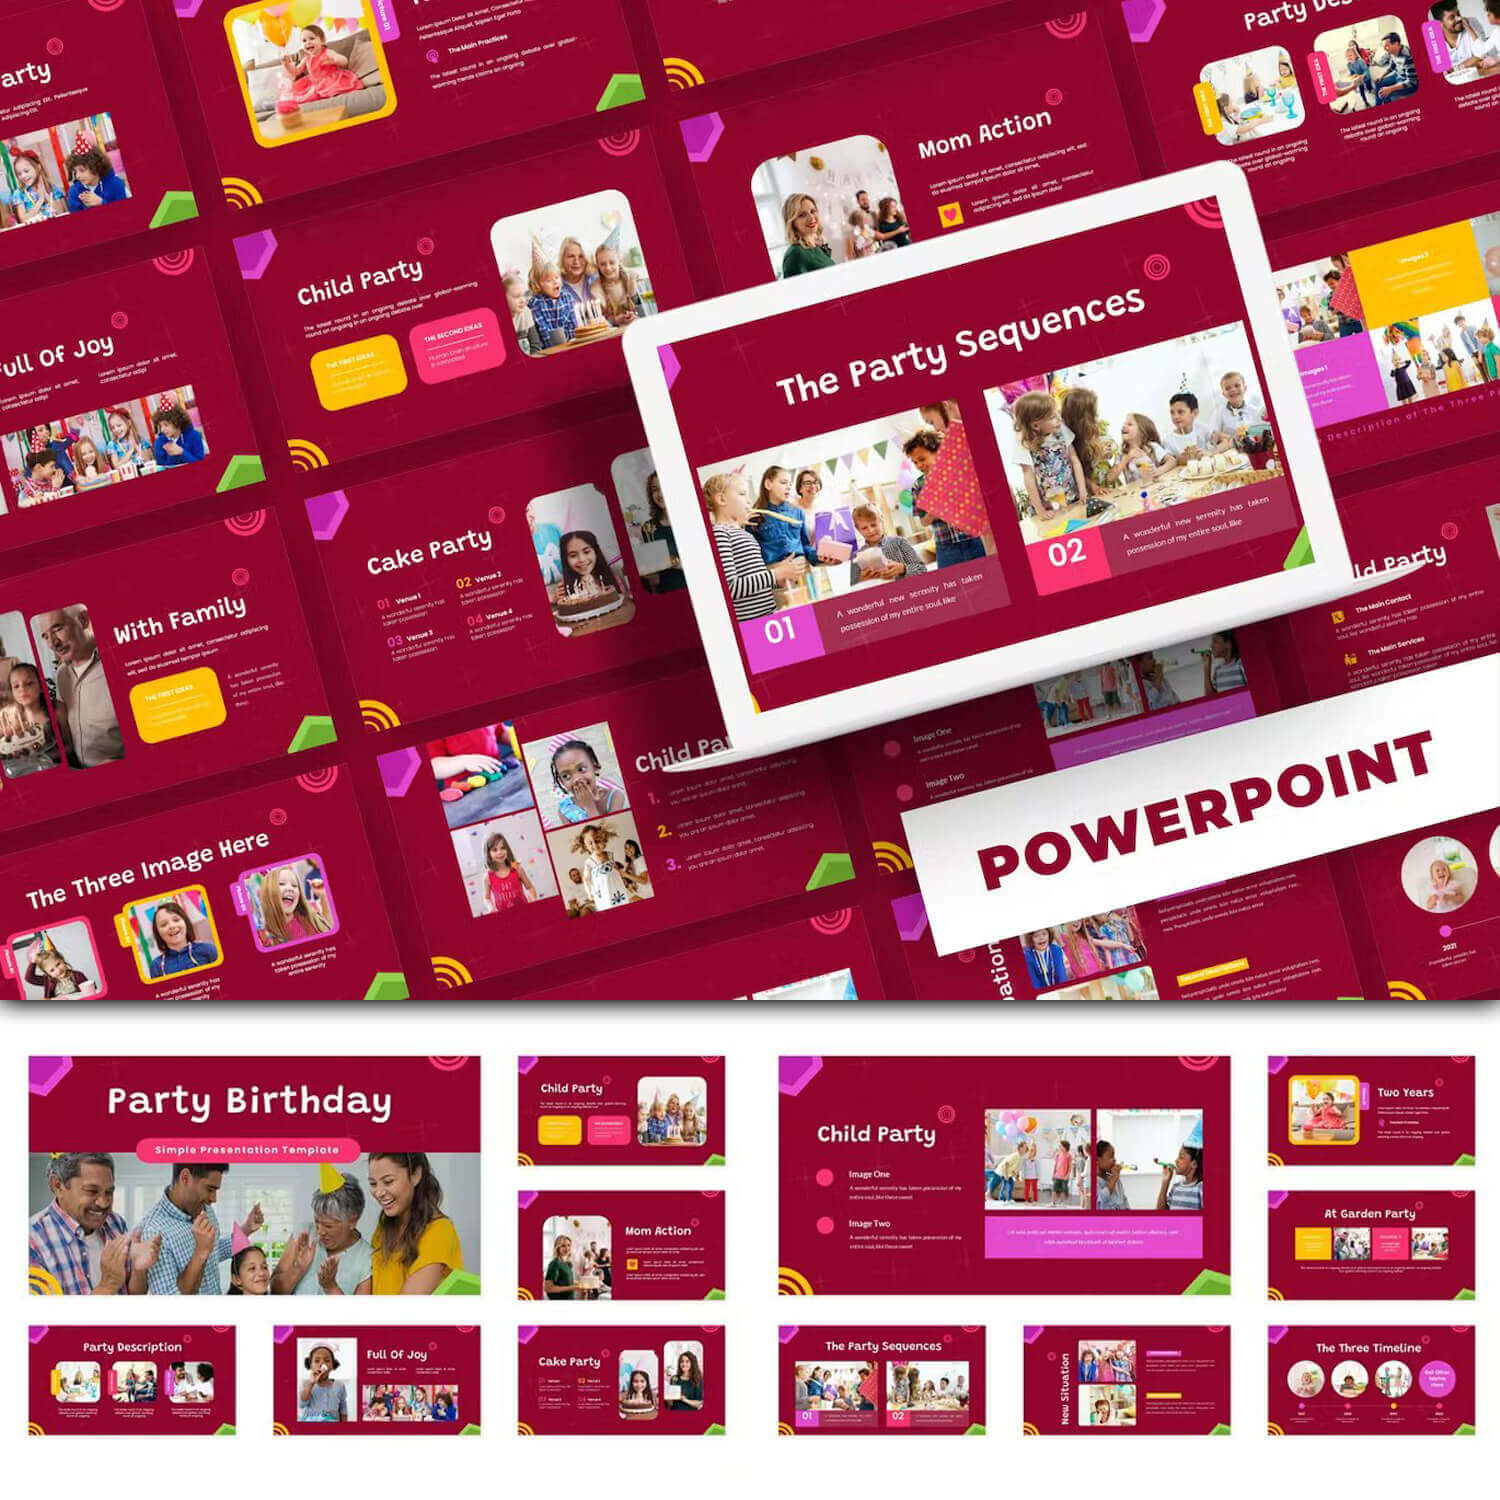 Party Birthday - Powerpoint Template.